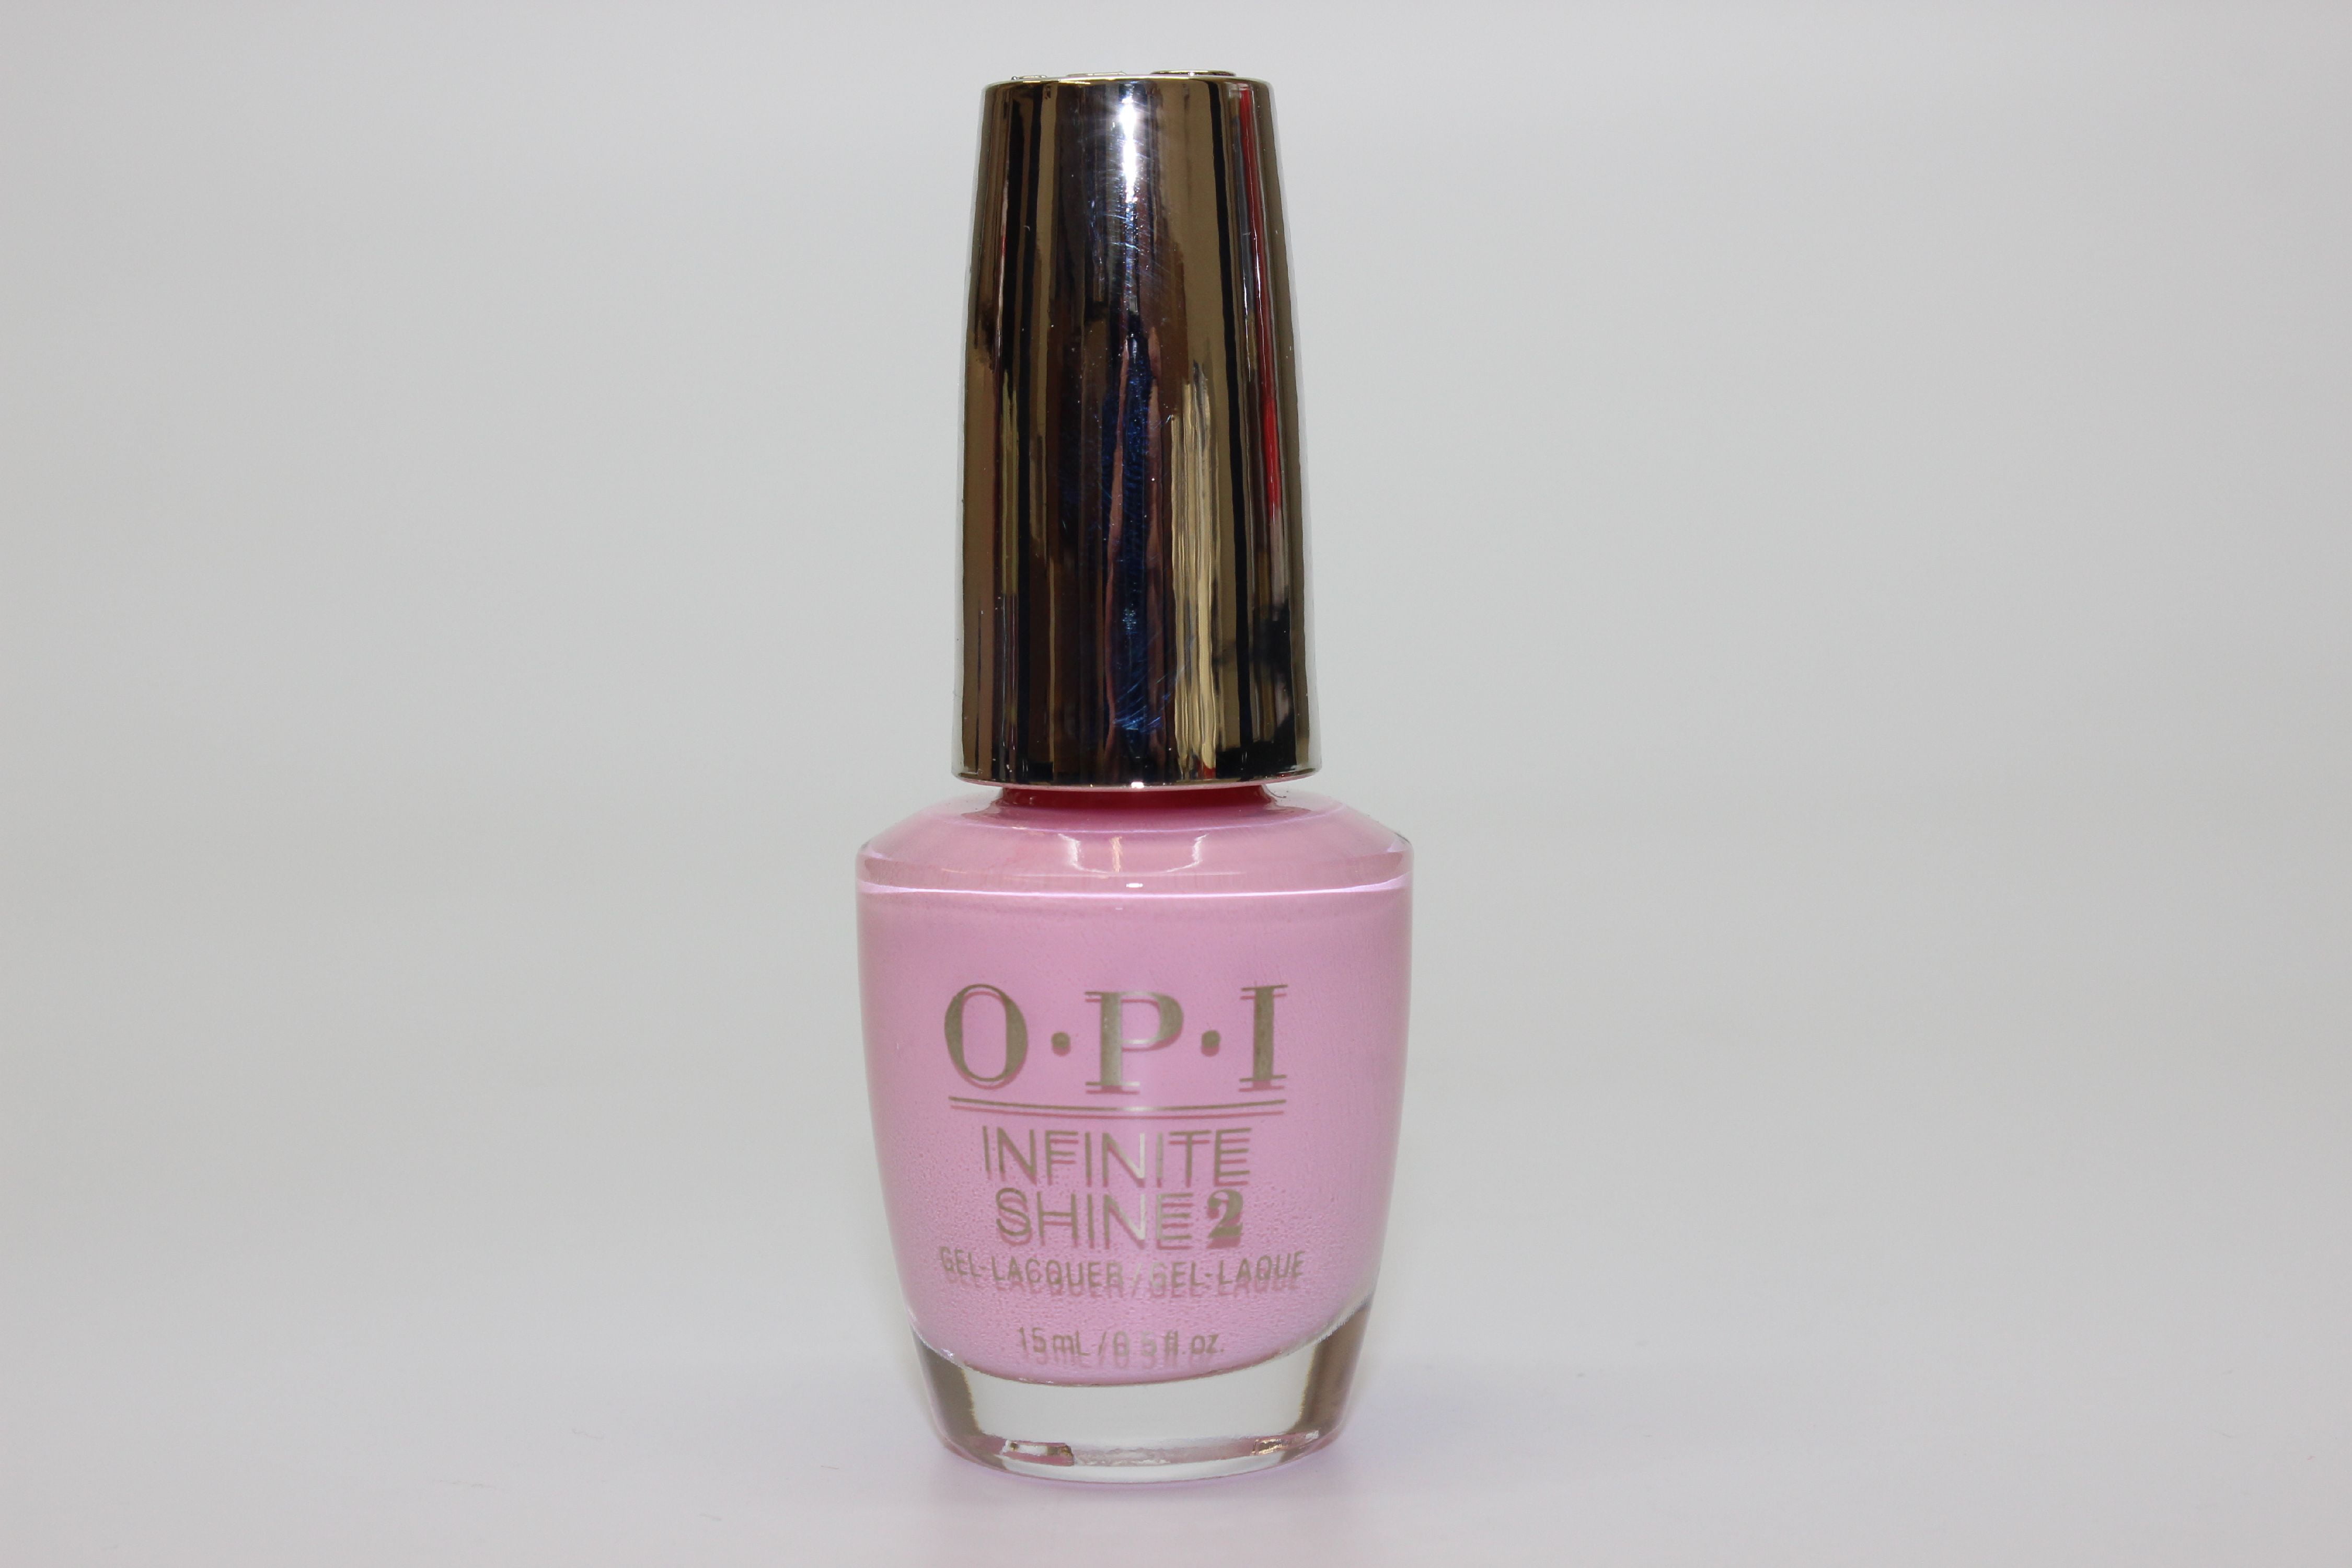 3. OPI "Mod About You" - wide 6